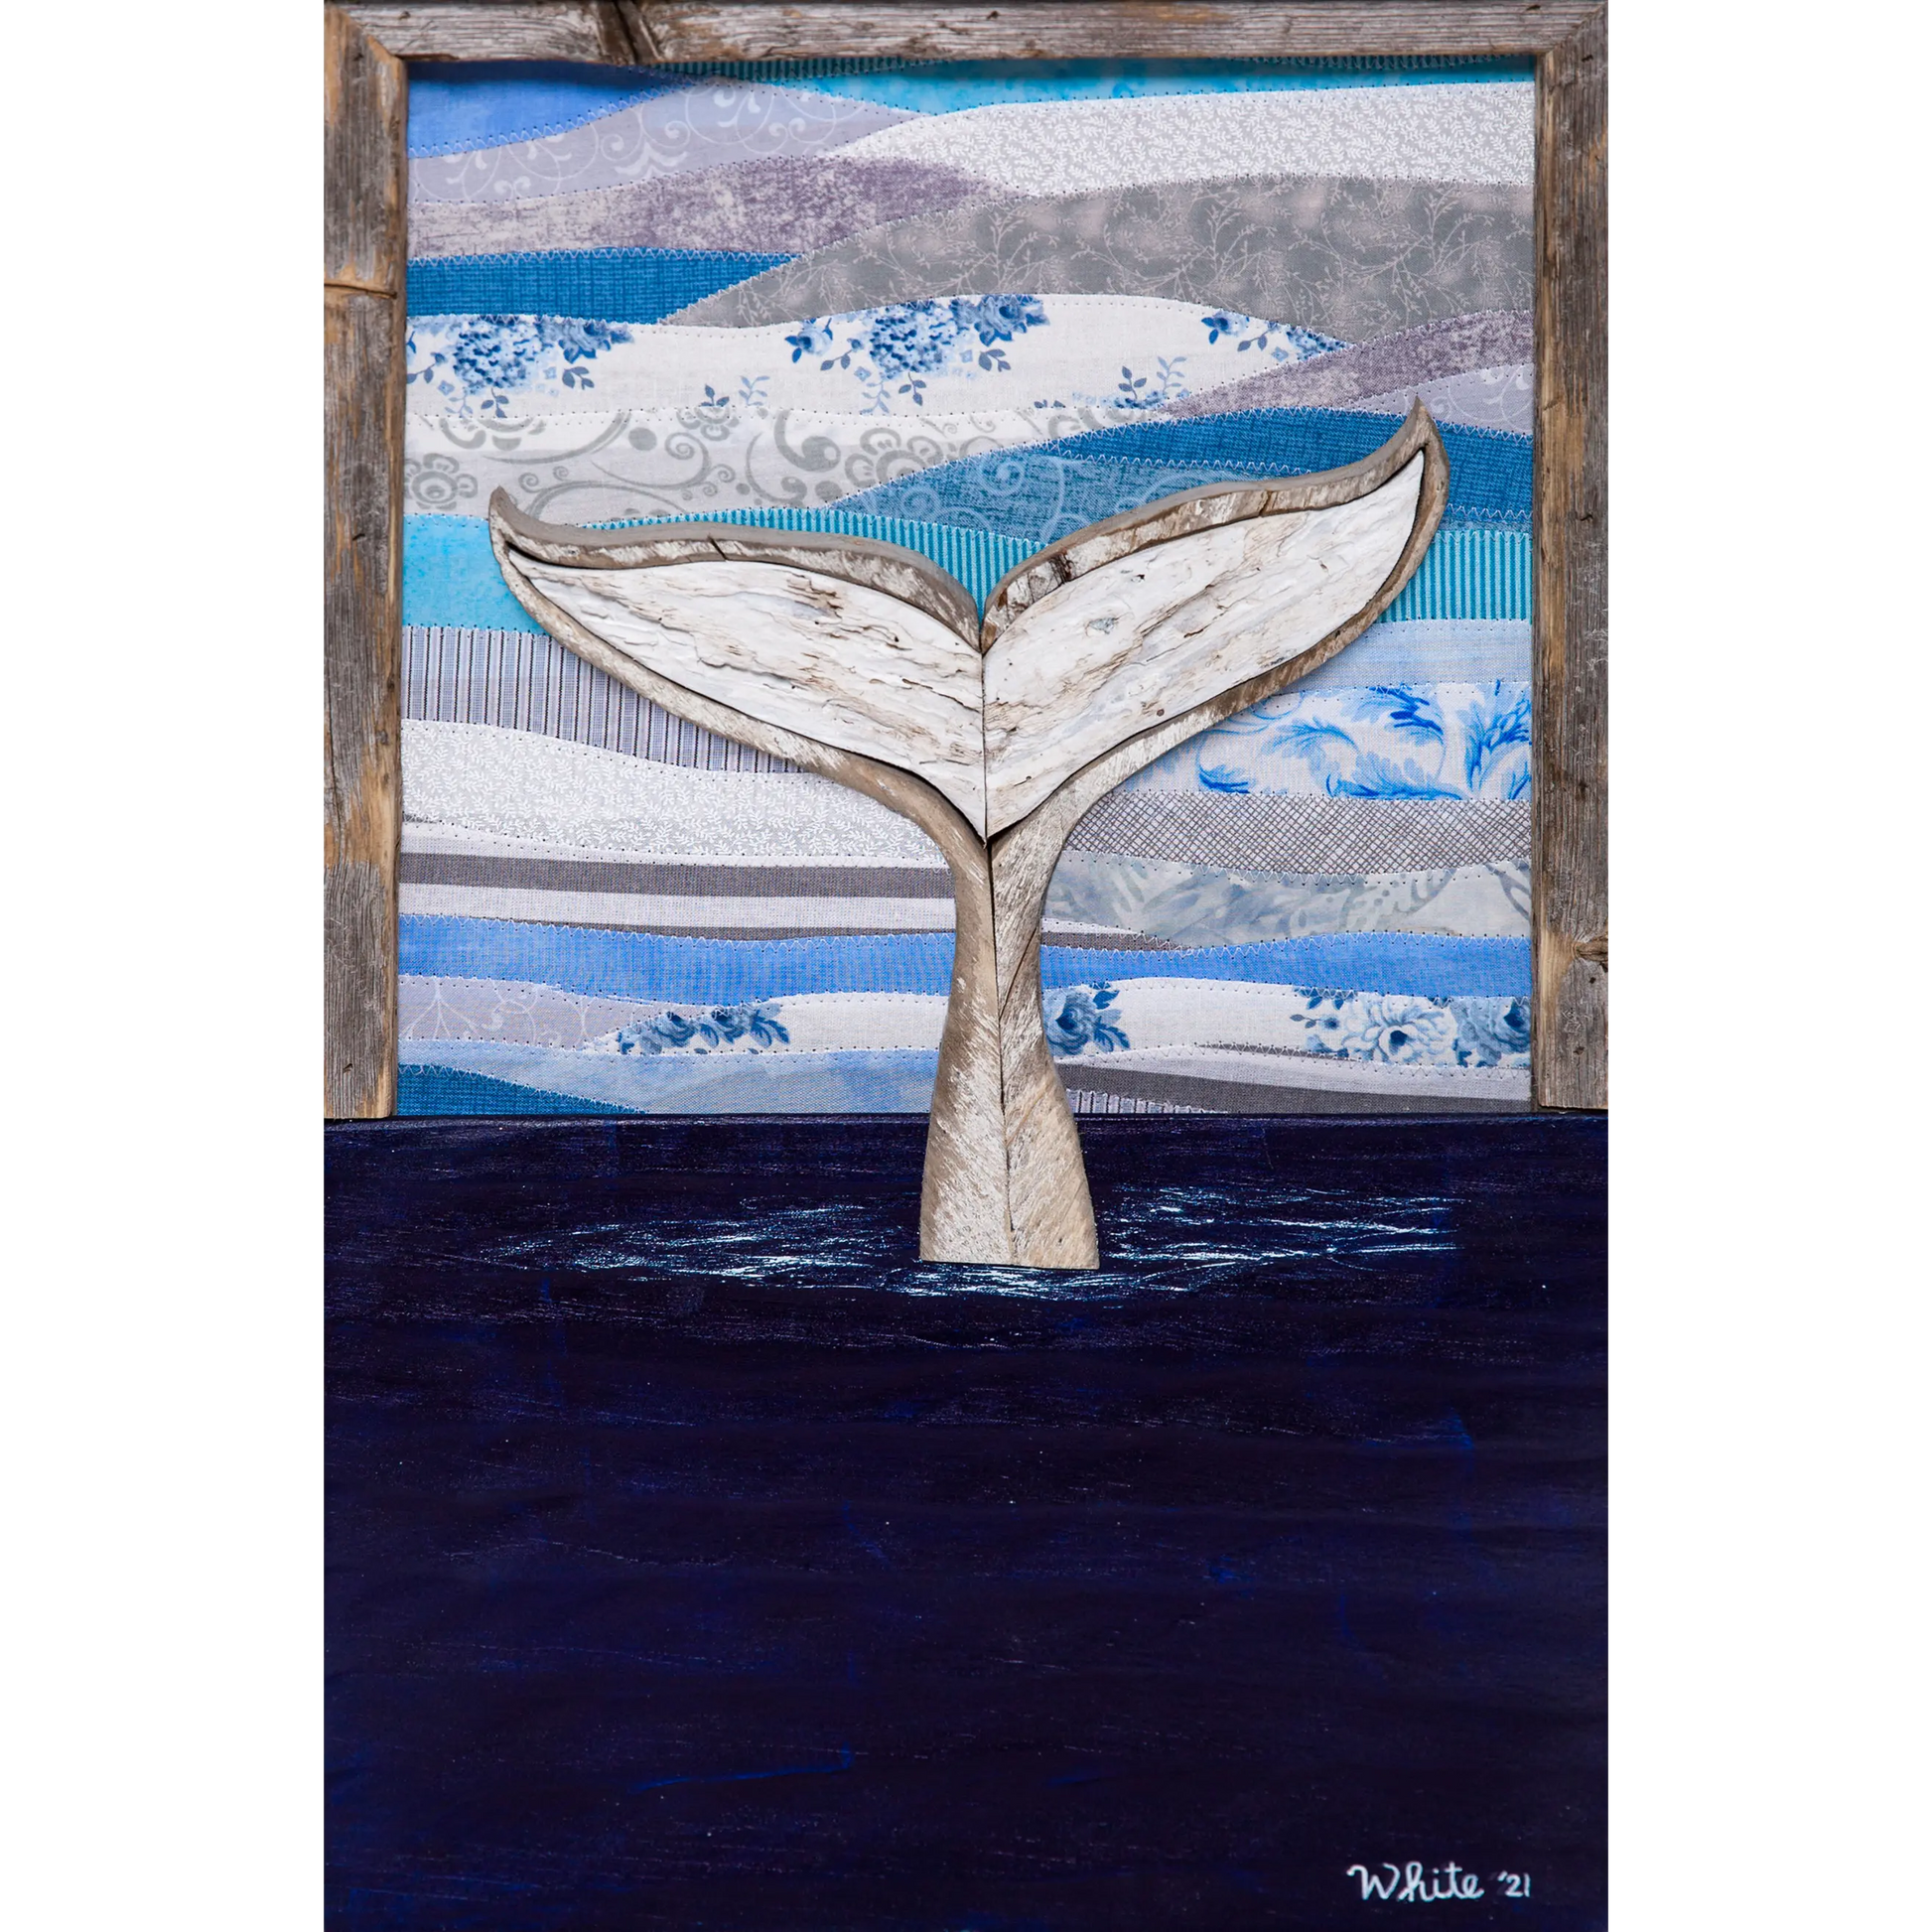 Shop for Newfoundland driftwood art at The White's Emporium. This Print piece shows a whale tail diving into the water against a quilted fabric sky.